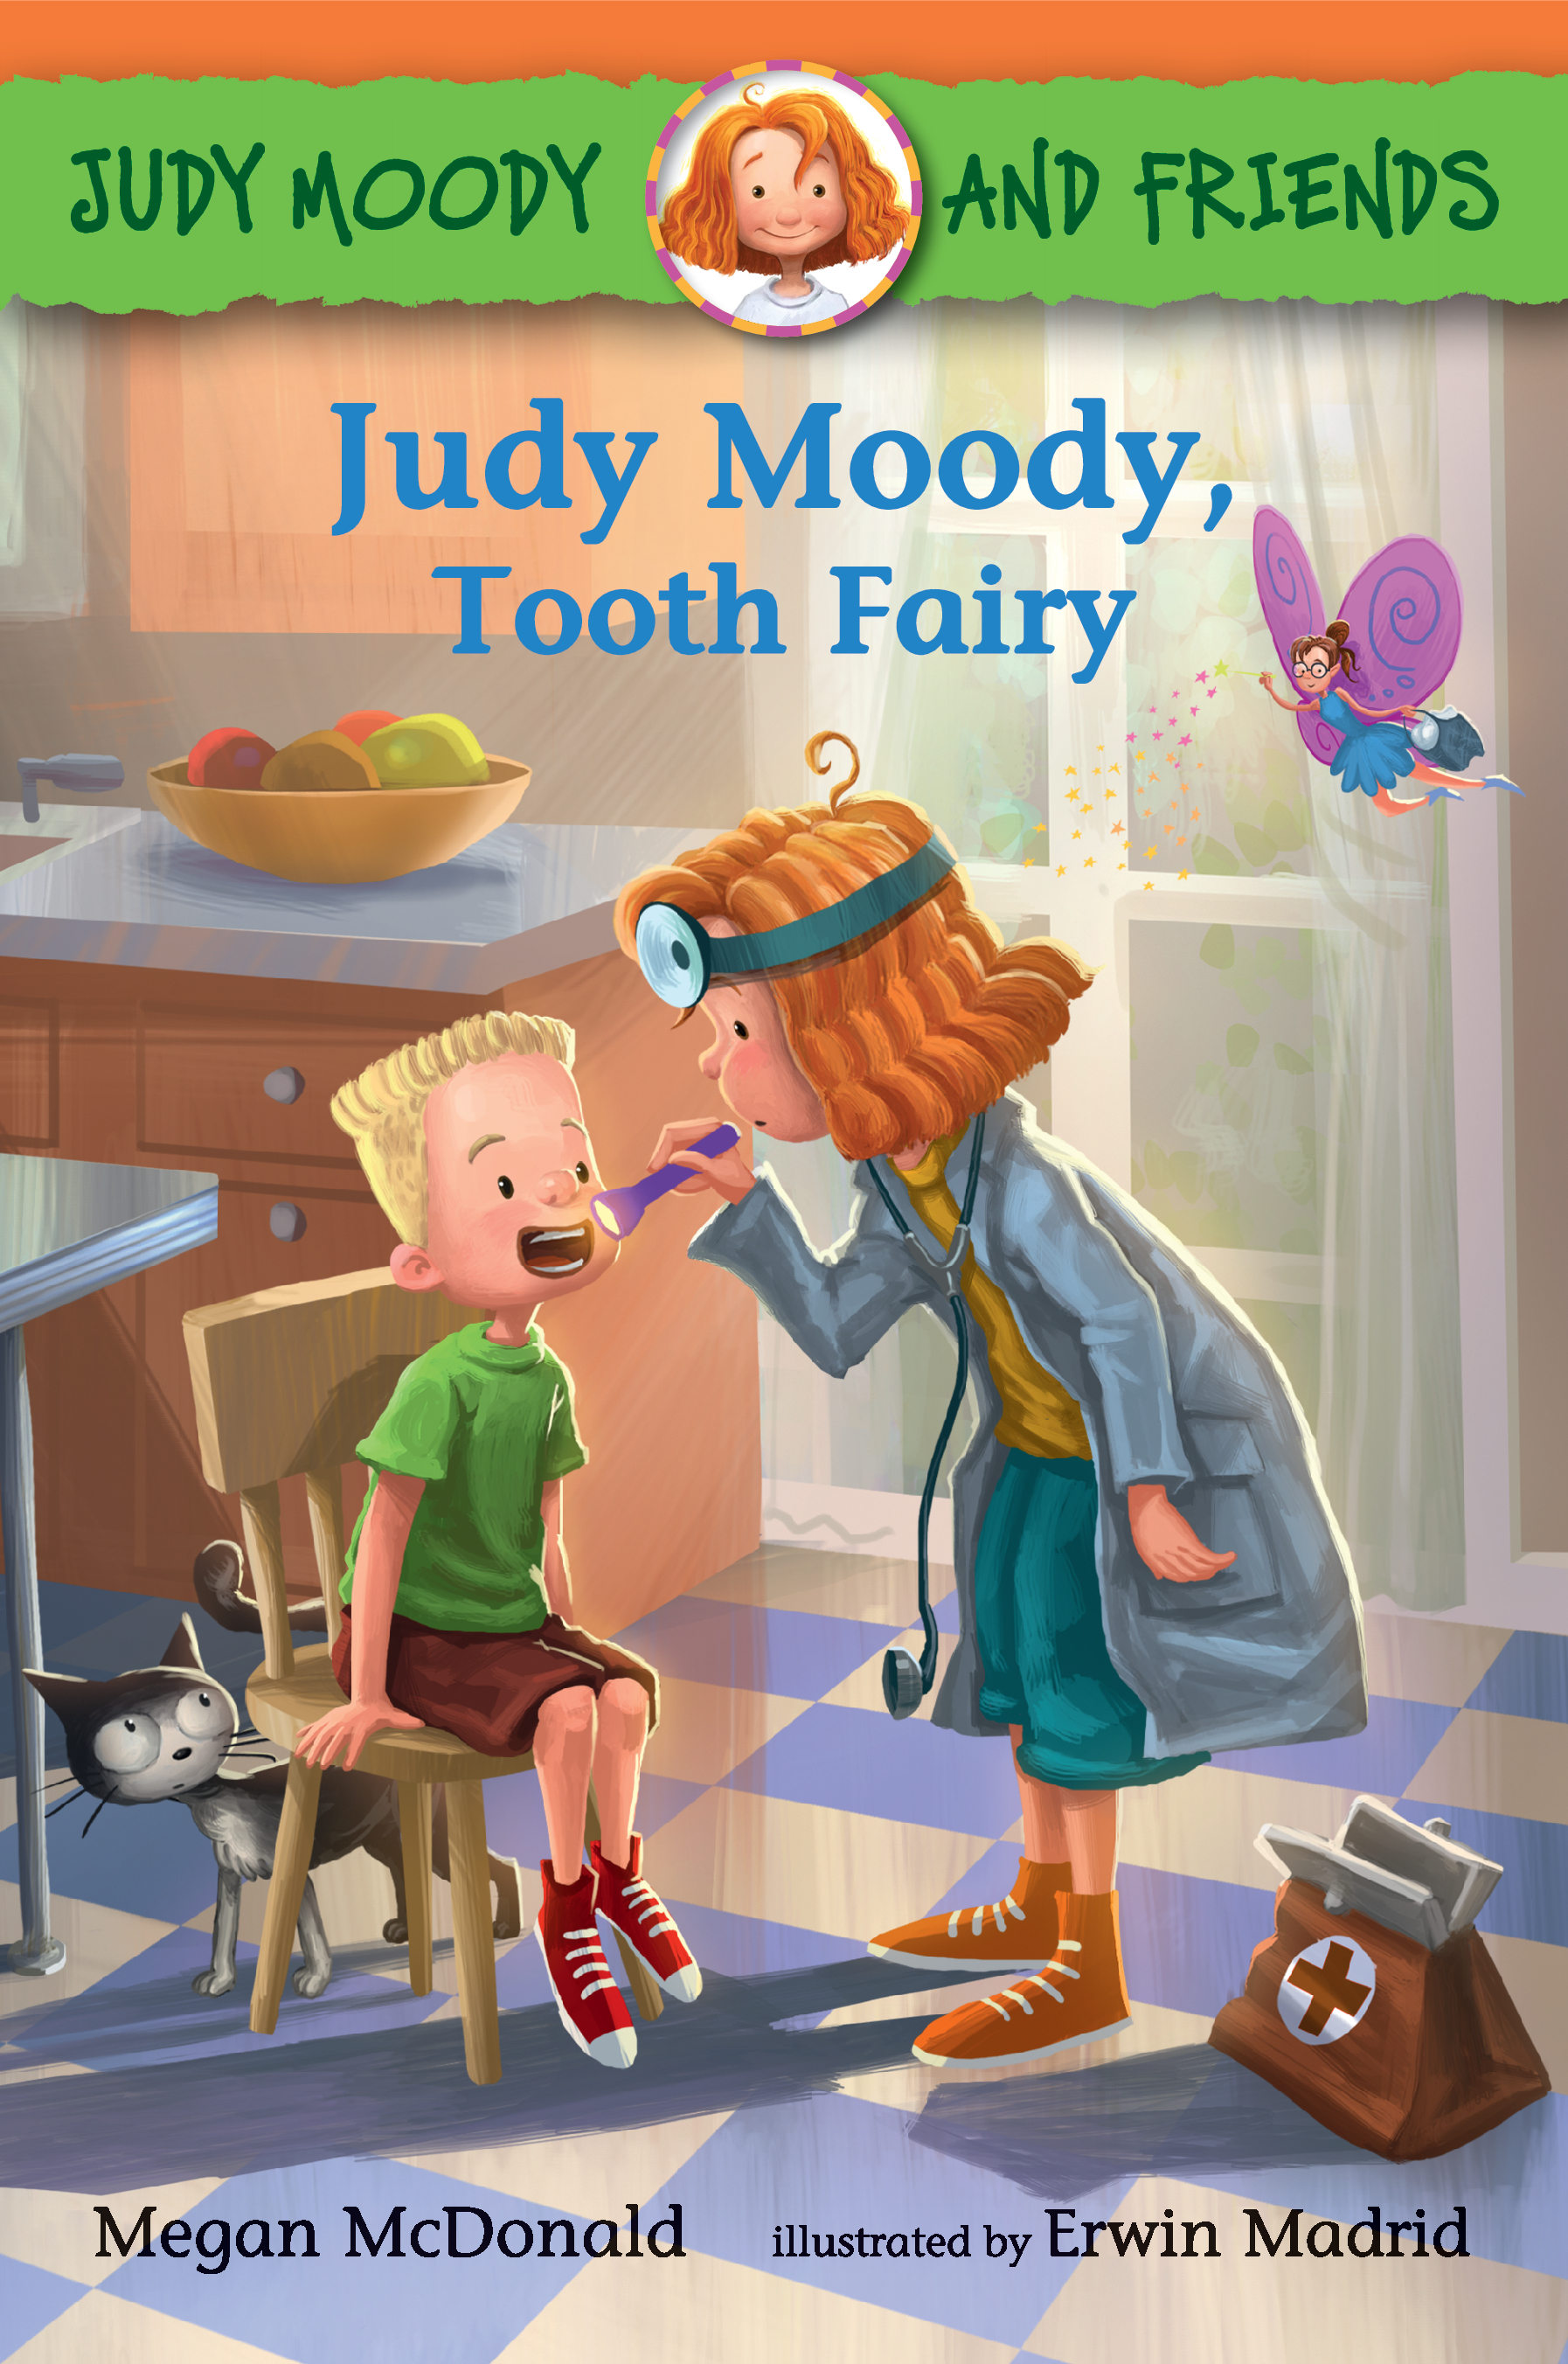 Judy-Moody-and-Friends-Judy-Moody-Tooth-Fairy